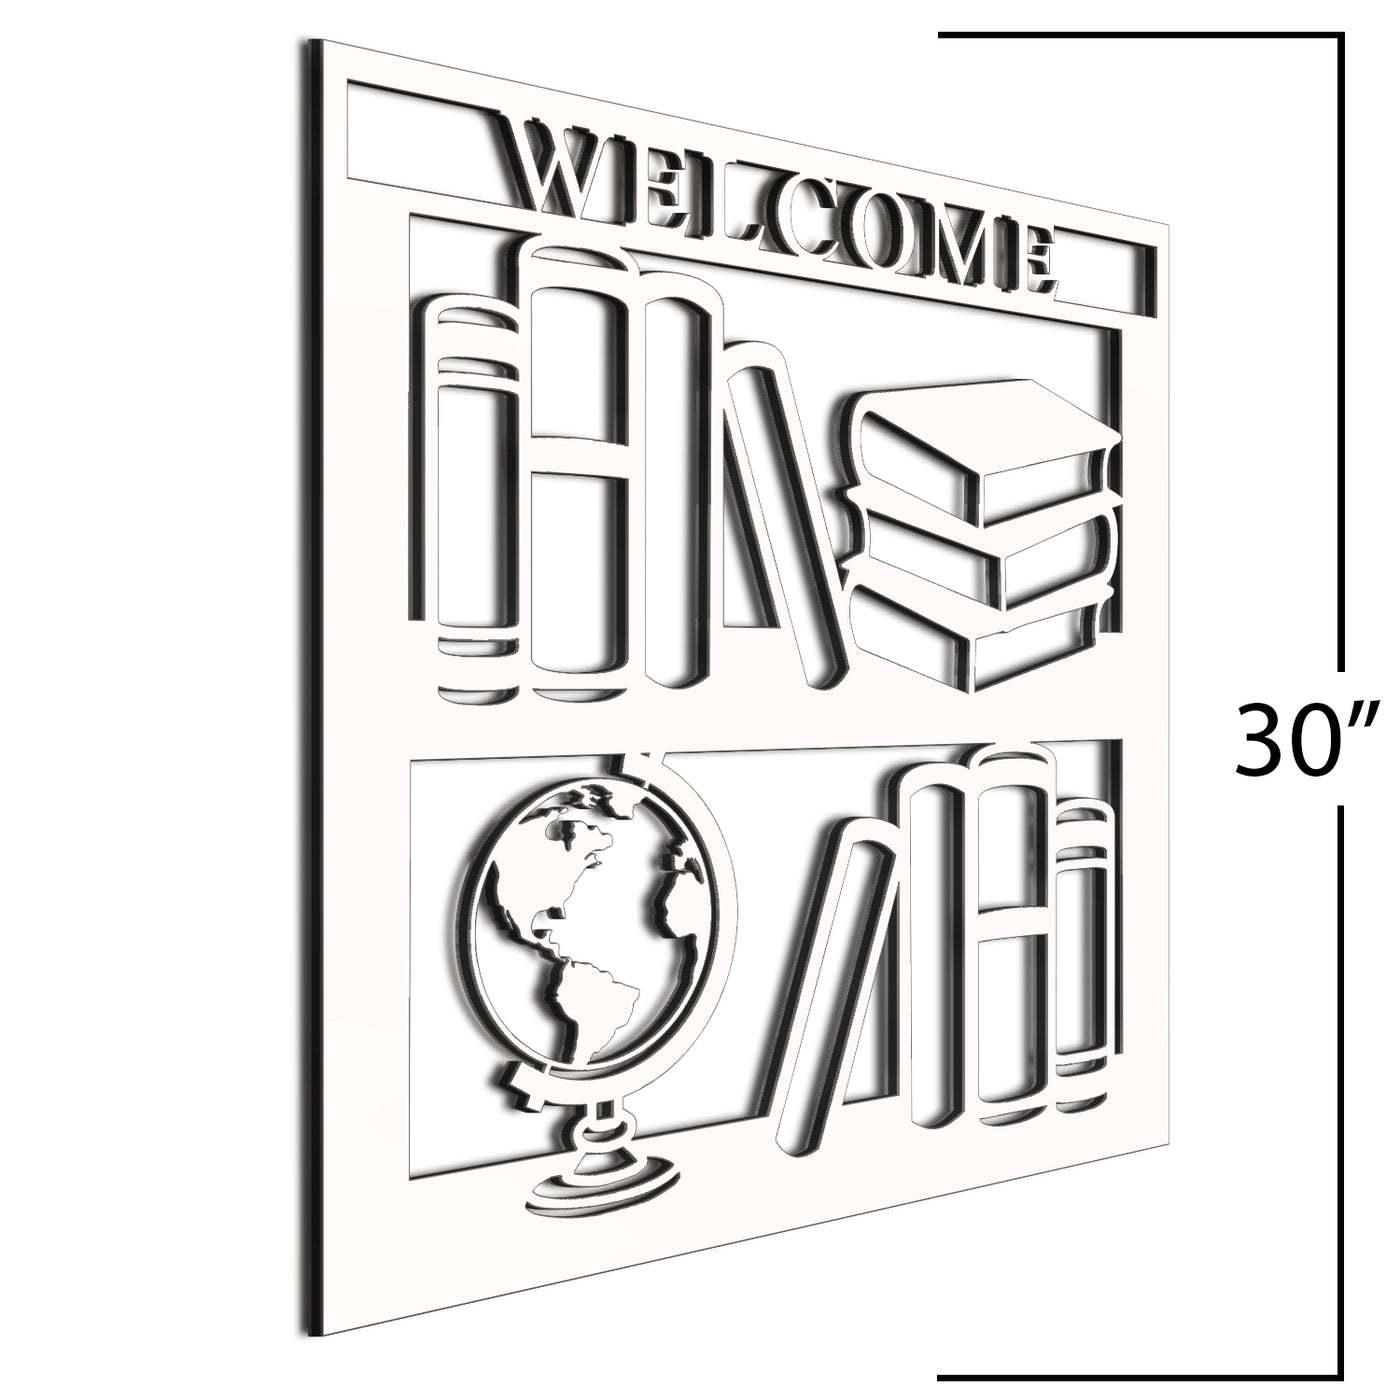 Welcome BookShelf White Sign 30 Inches